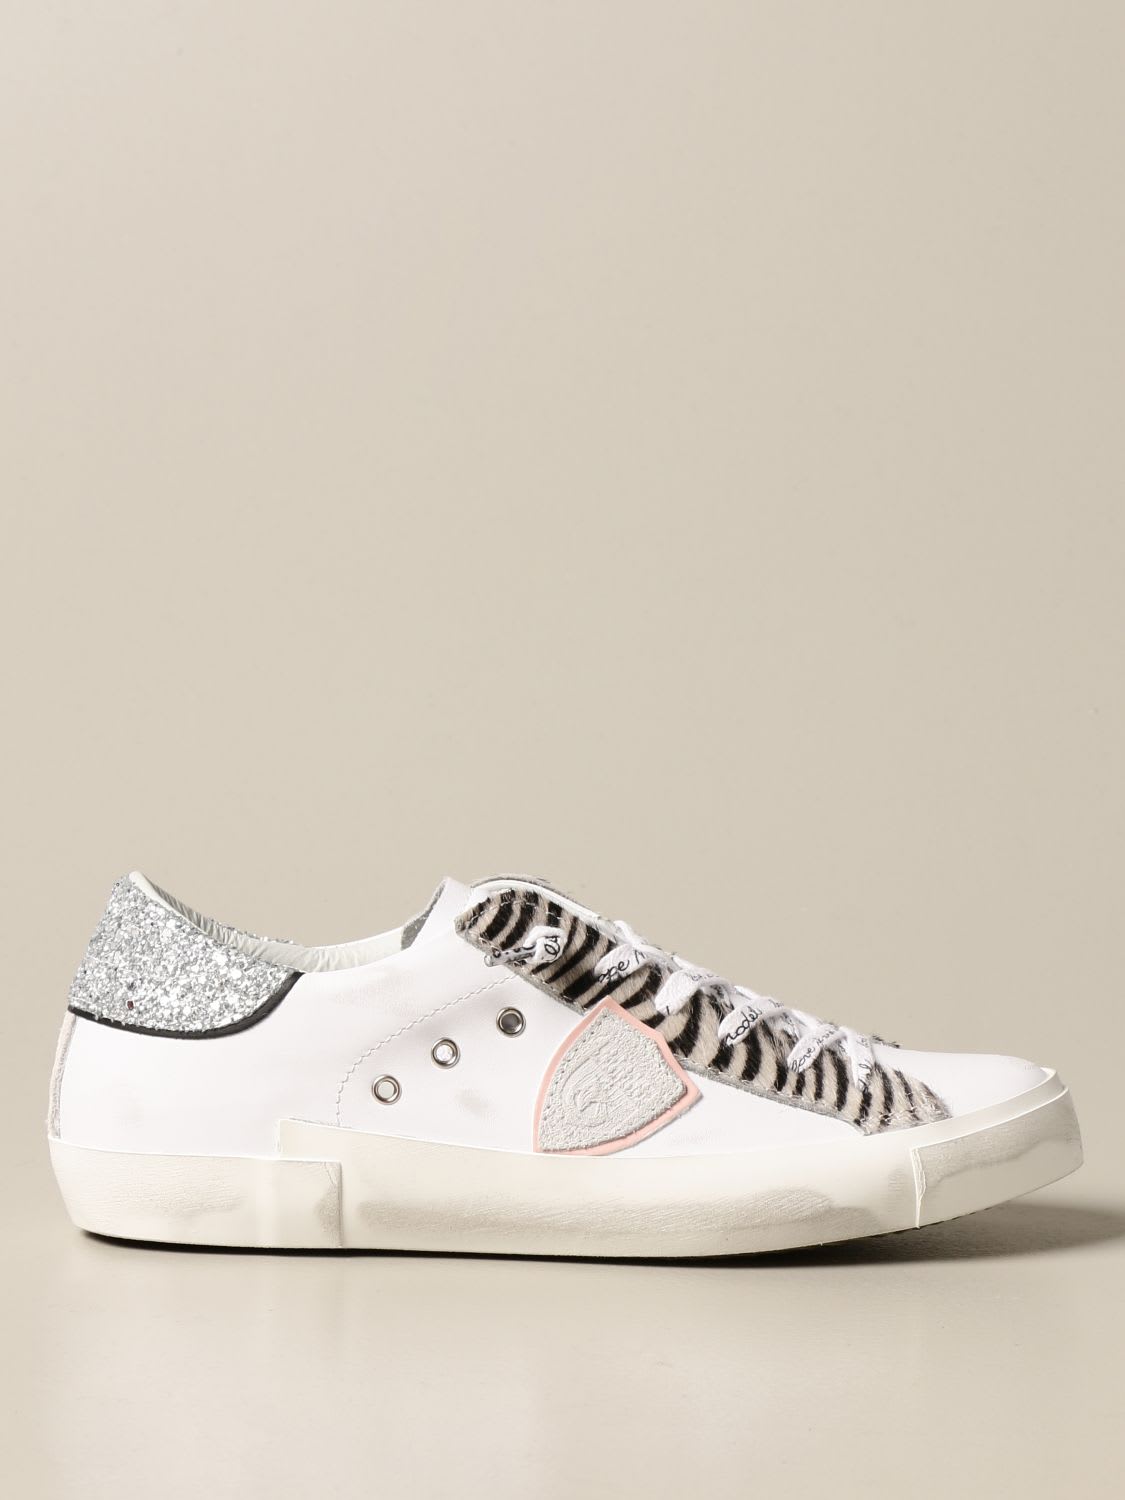 Philippe Model Sneakers Paris Philippe Model Sneakers In Leather With Animalier Details